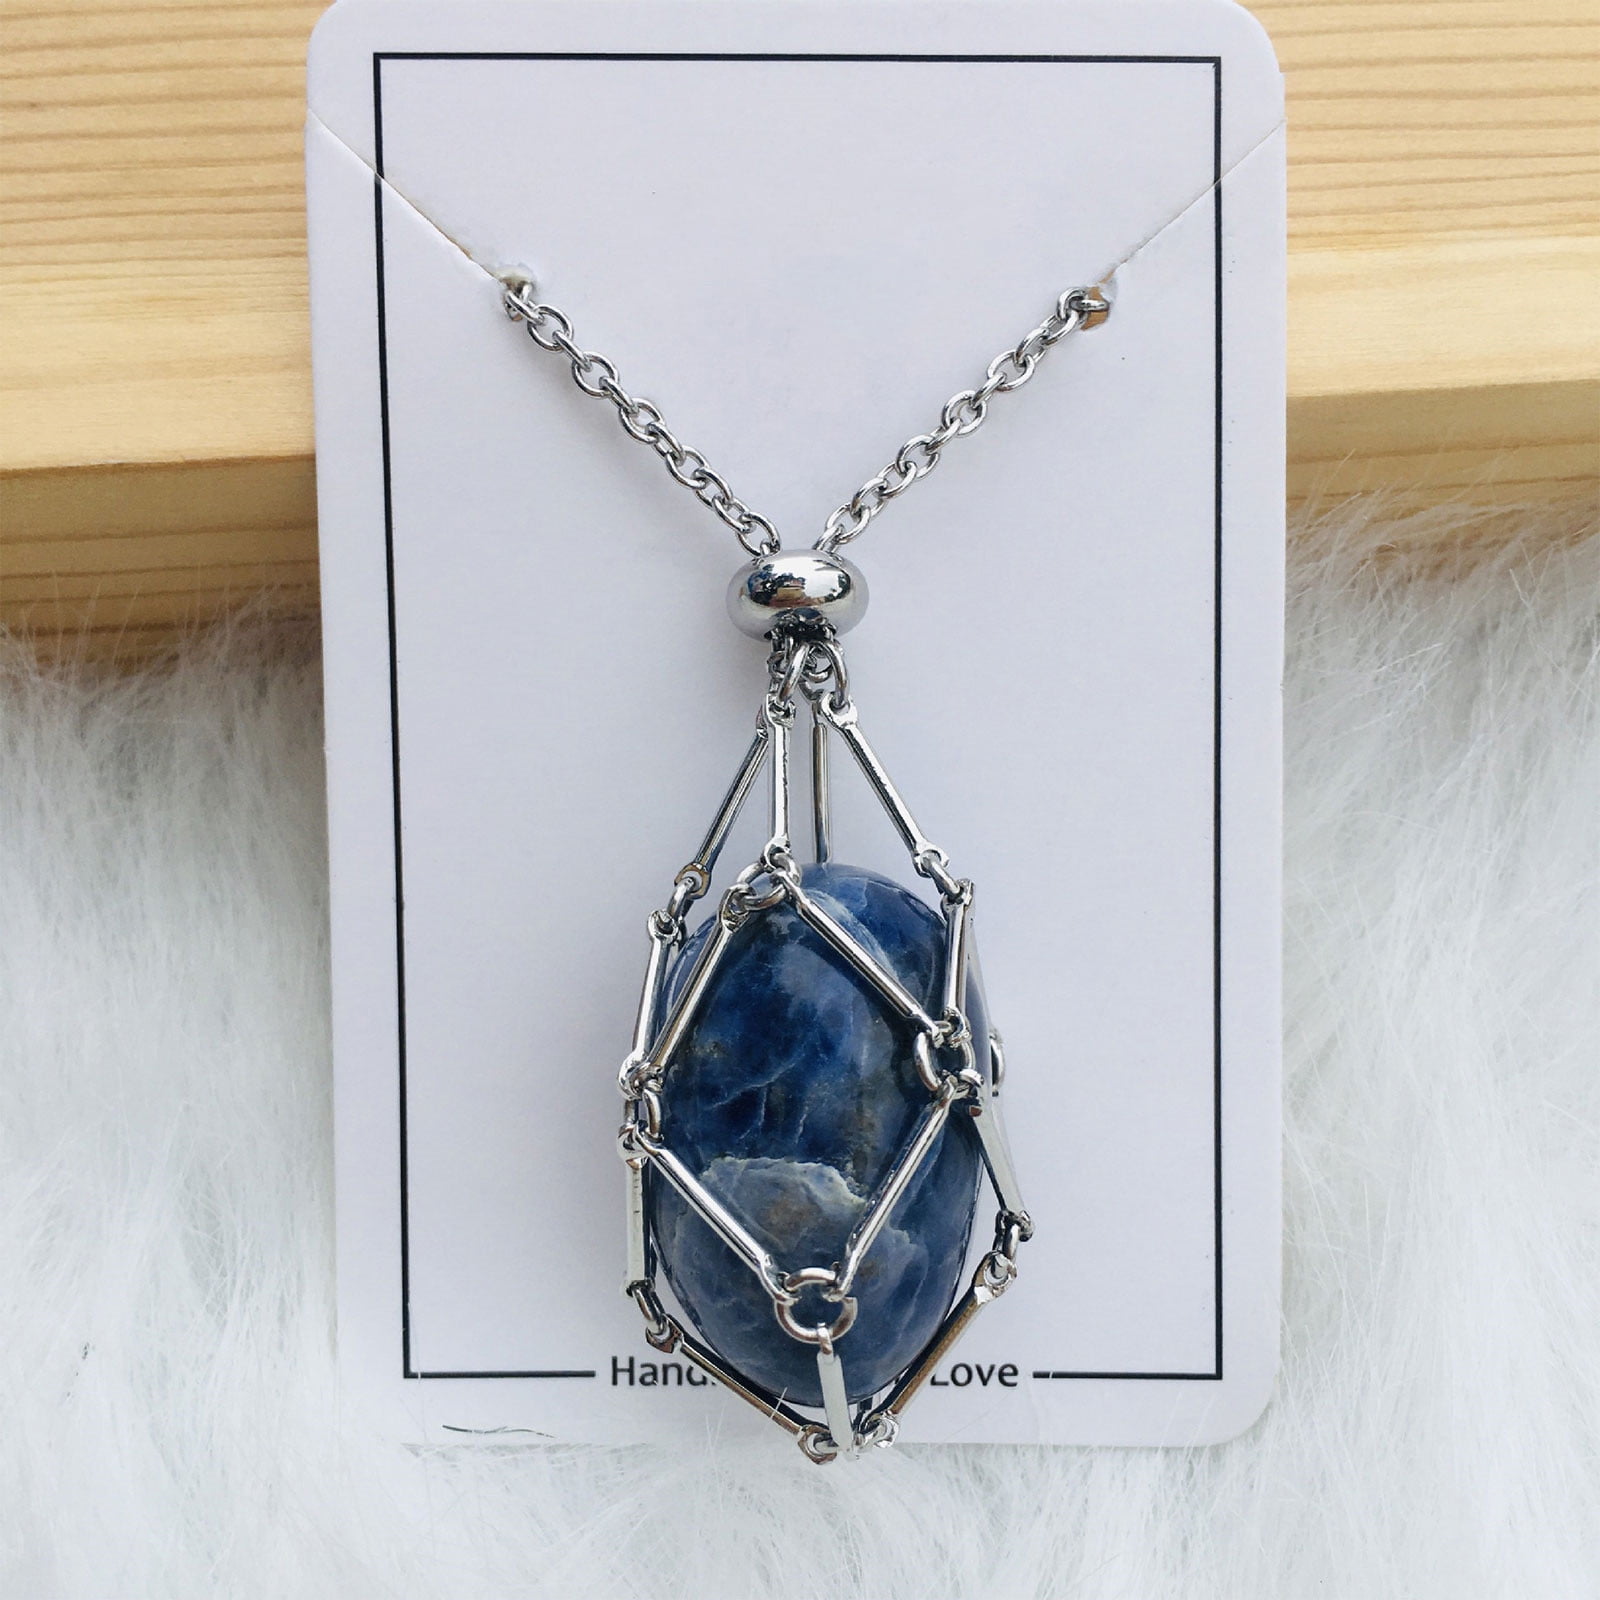 Clearance! Crystal Stone Holder Necklace, Adjustable Length Crystal Pendant  Necklace, Adjustable Necklace Cord Crystal Holder Necklace for Women Men 